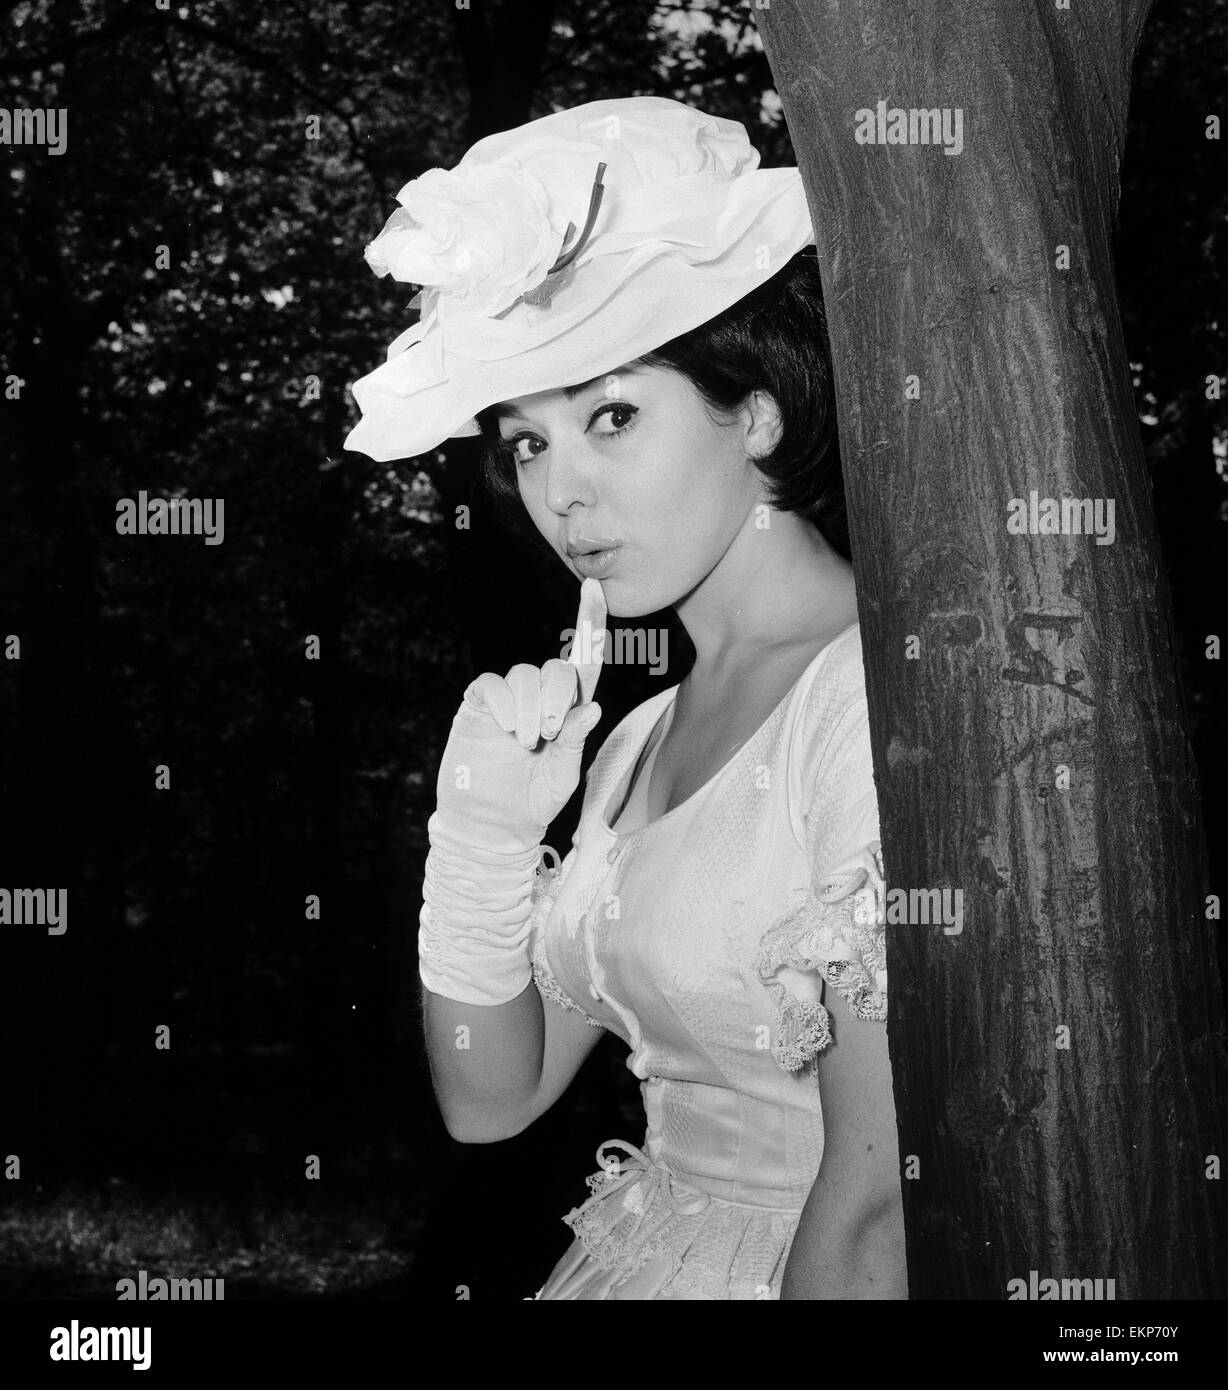 Actress and singer Susan Maughan, aged 20, photographed in a park near her home in Hornsey, London wearing an Ascot styled hat and dress. 11th June 1963. Stock Photo